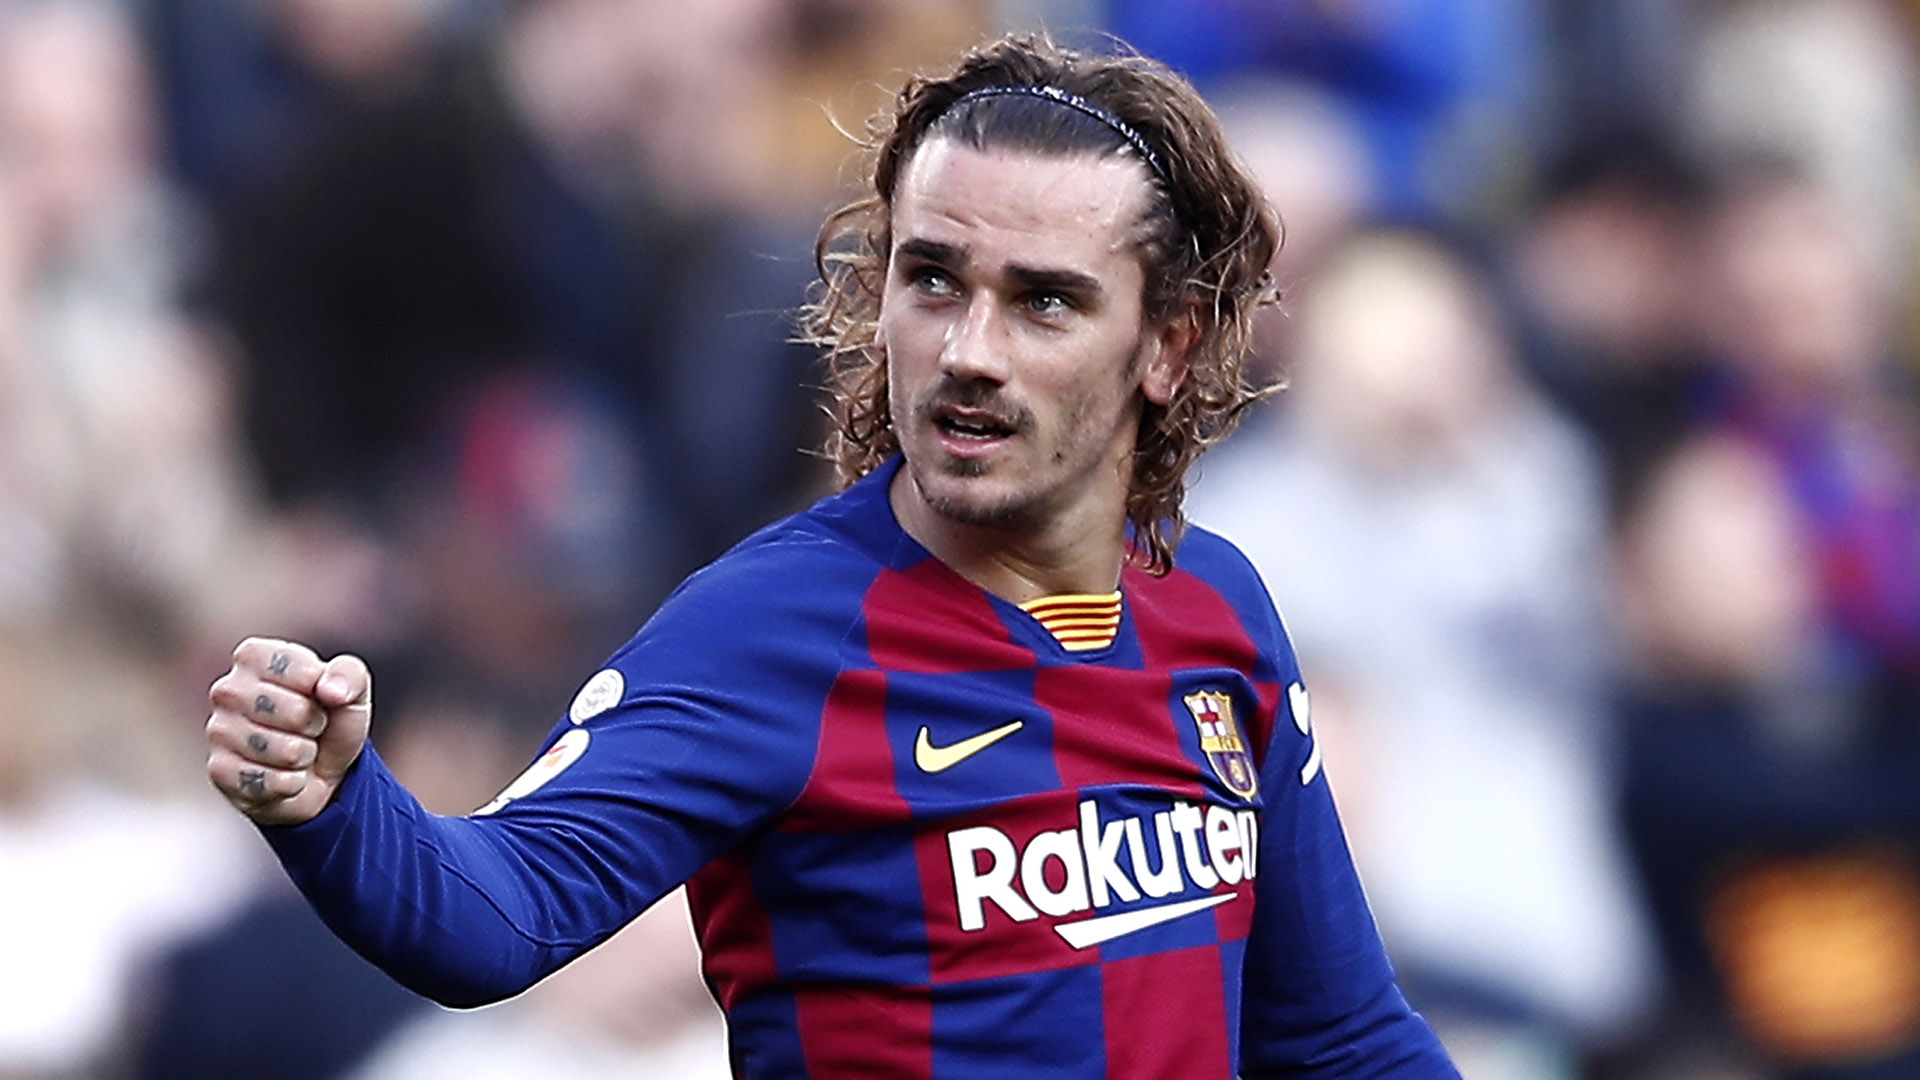 Griezmann isn't planning to leave Barcelona this summer. He wants to succeed at the Camp Nou. - Bóng Đá